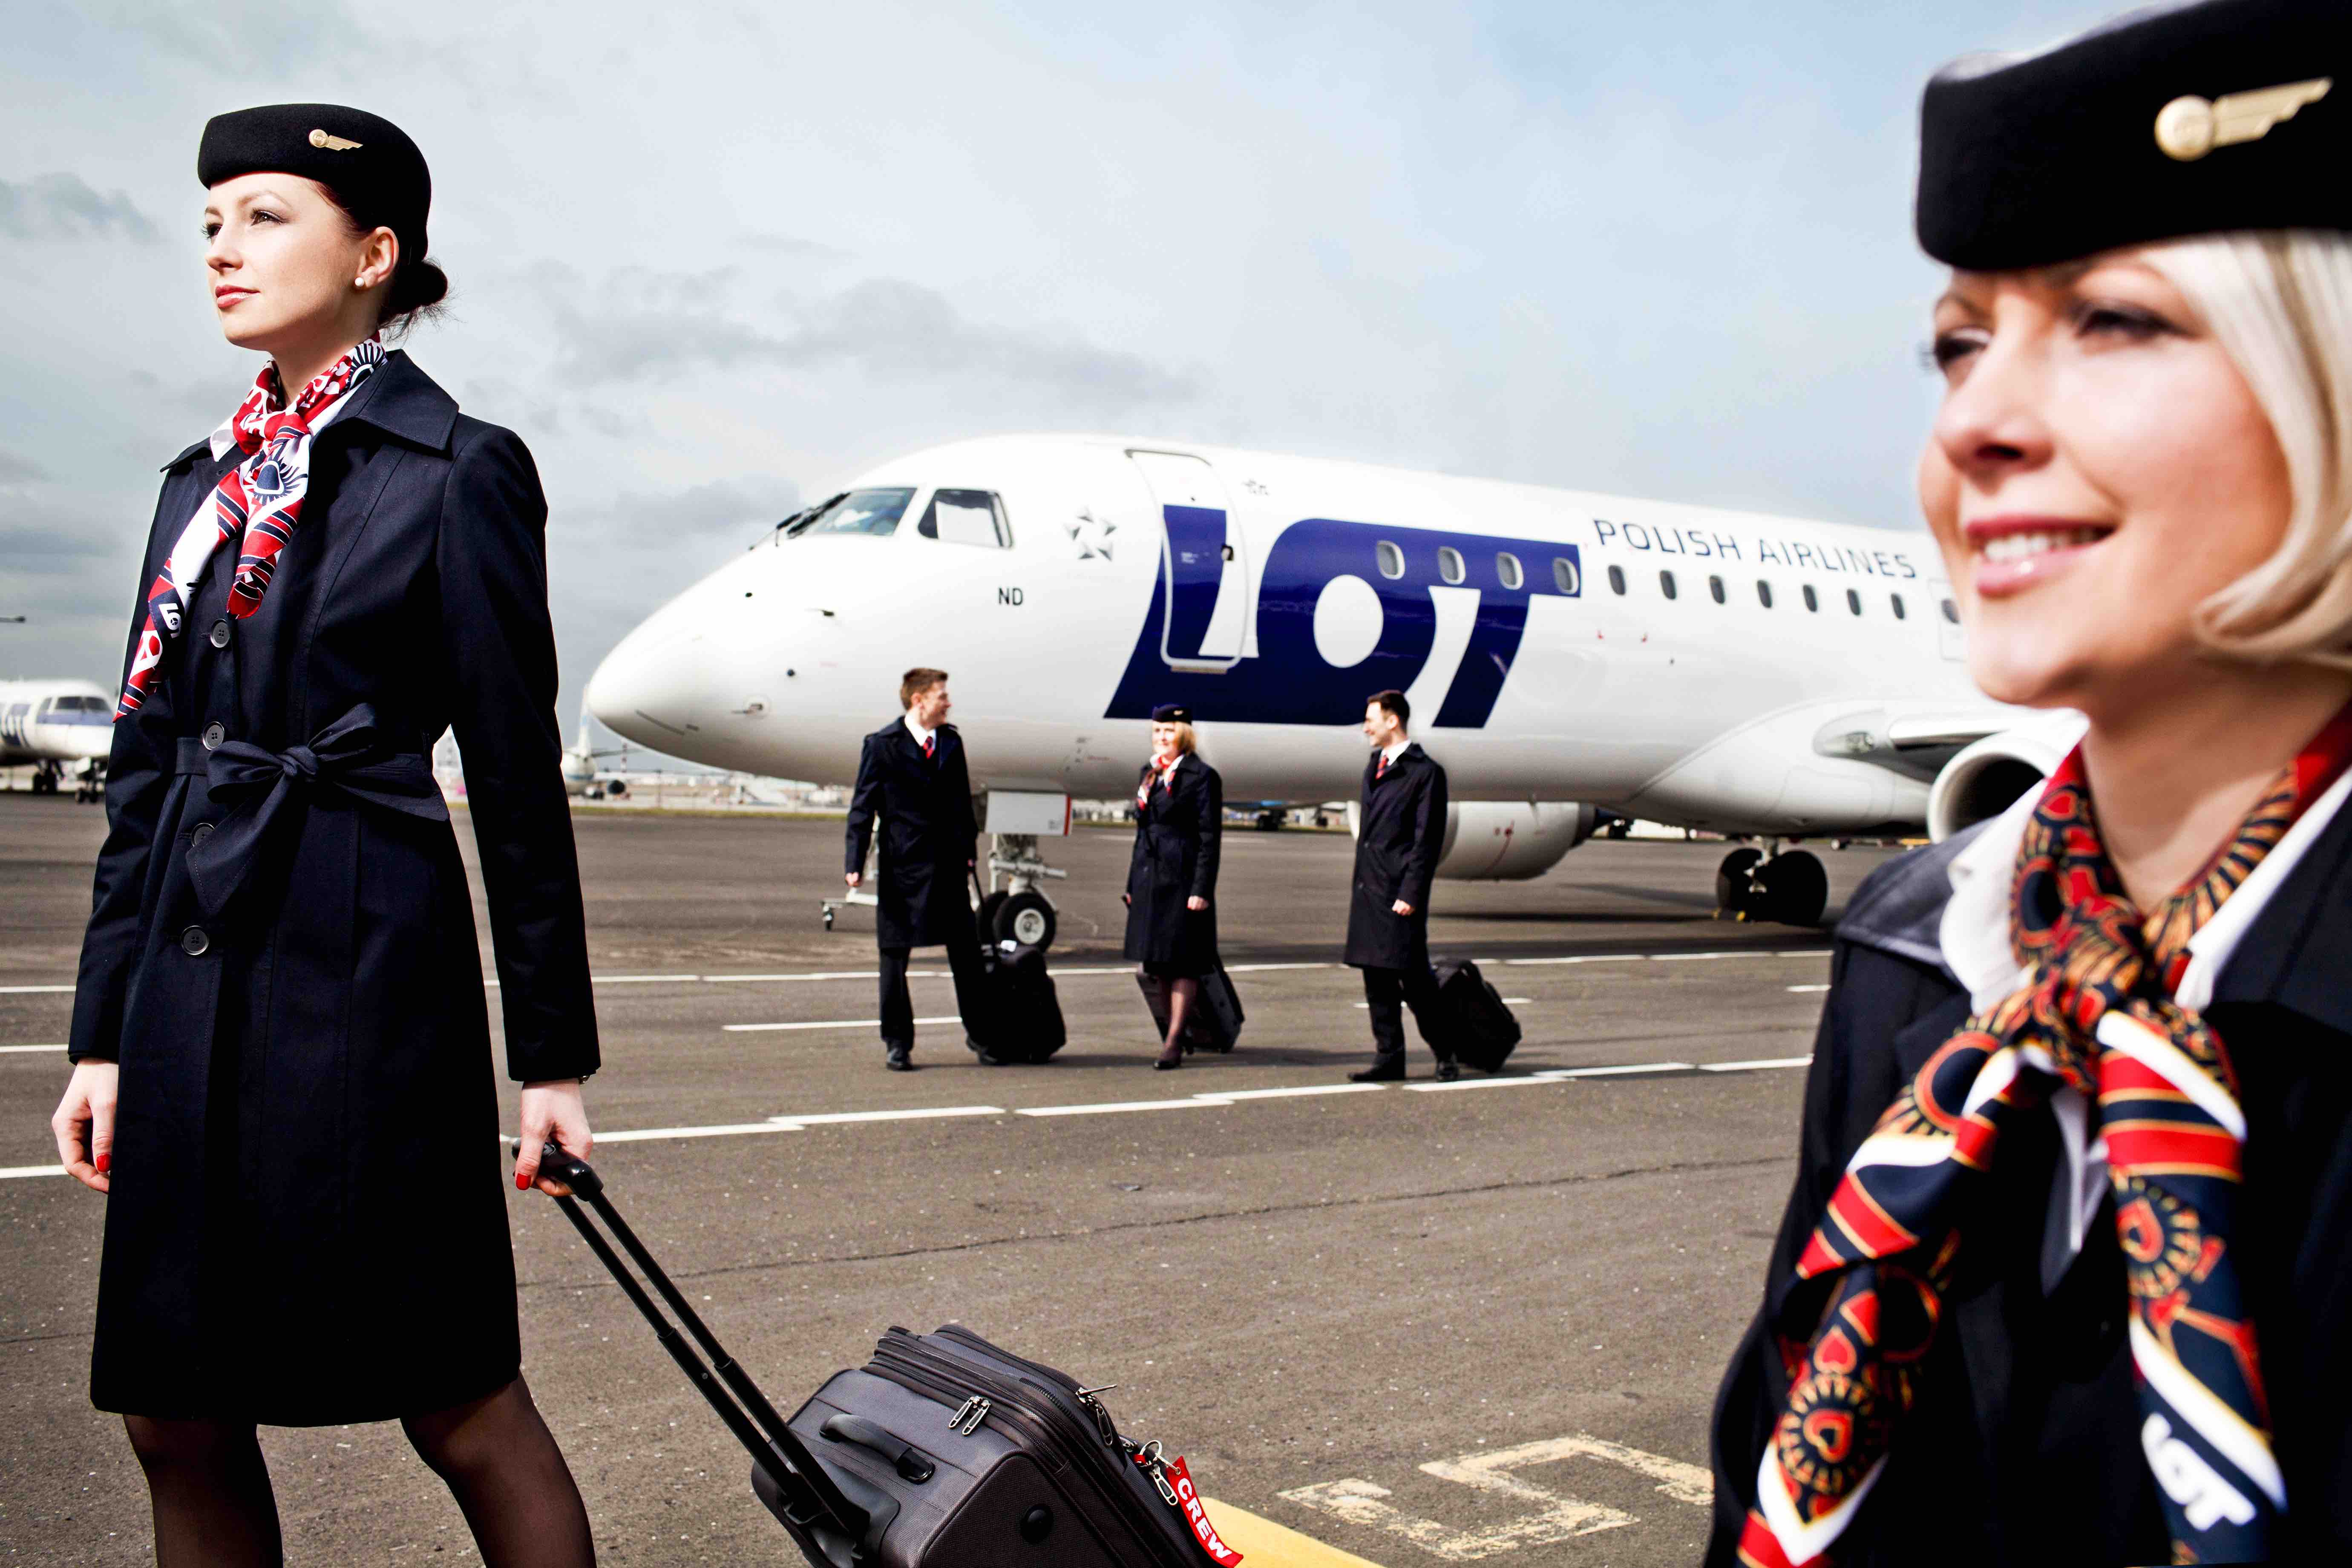 LOT Polish airlines